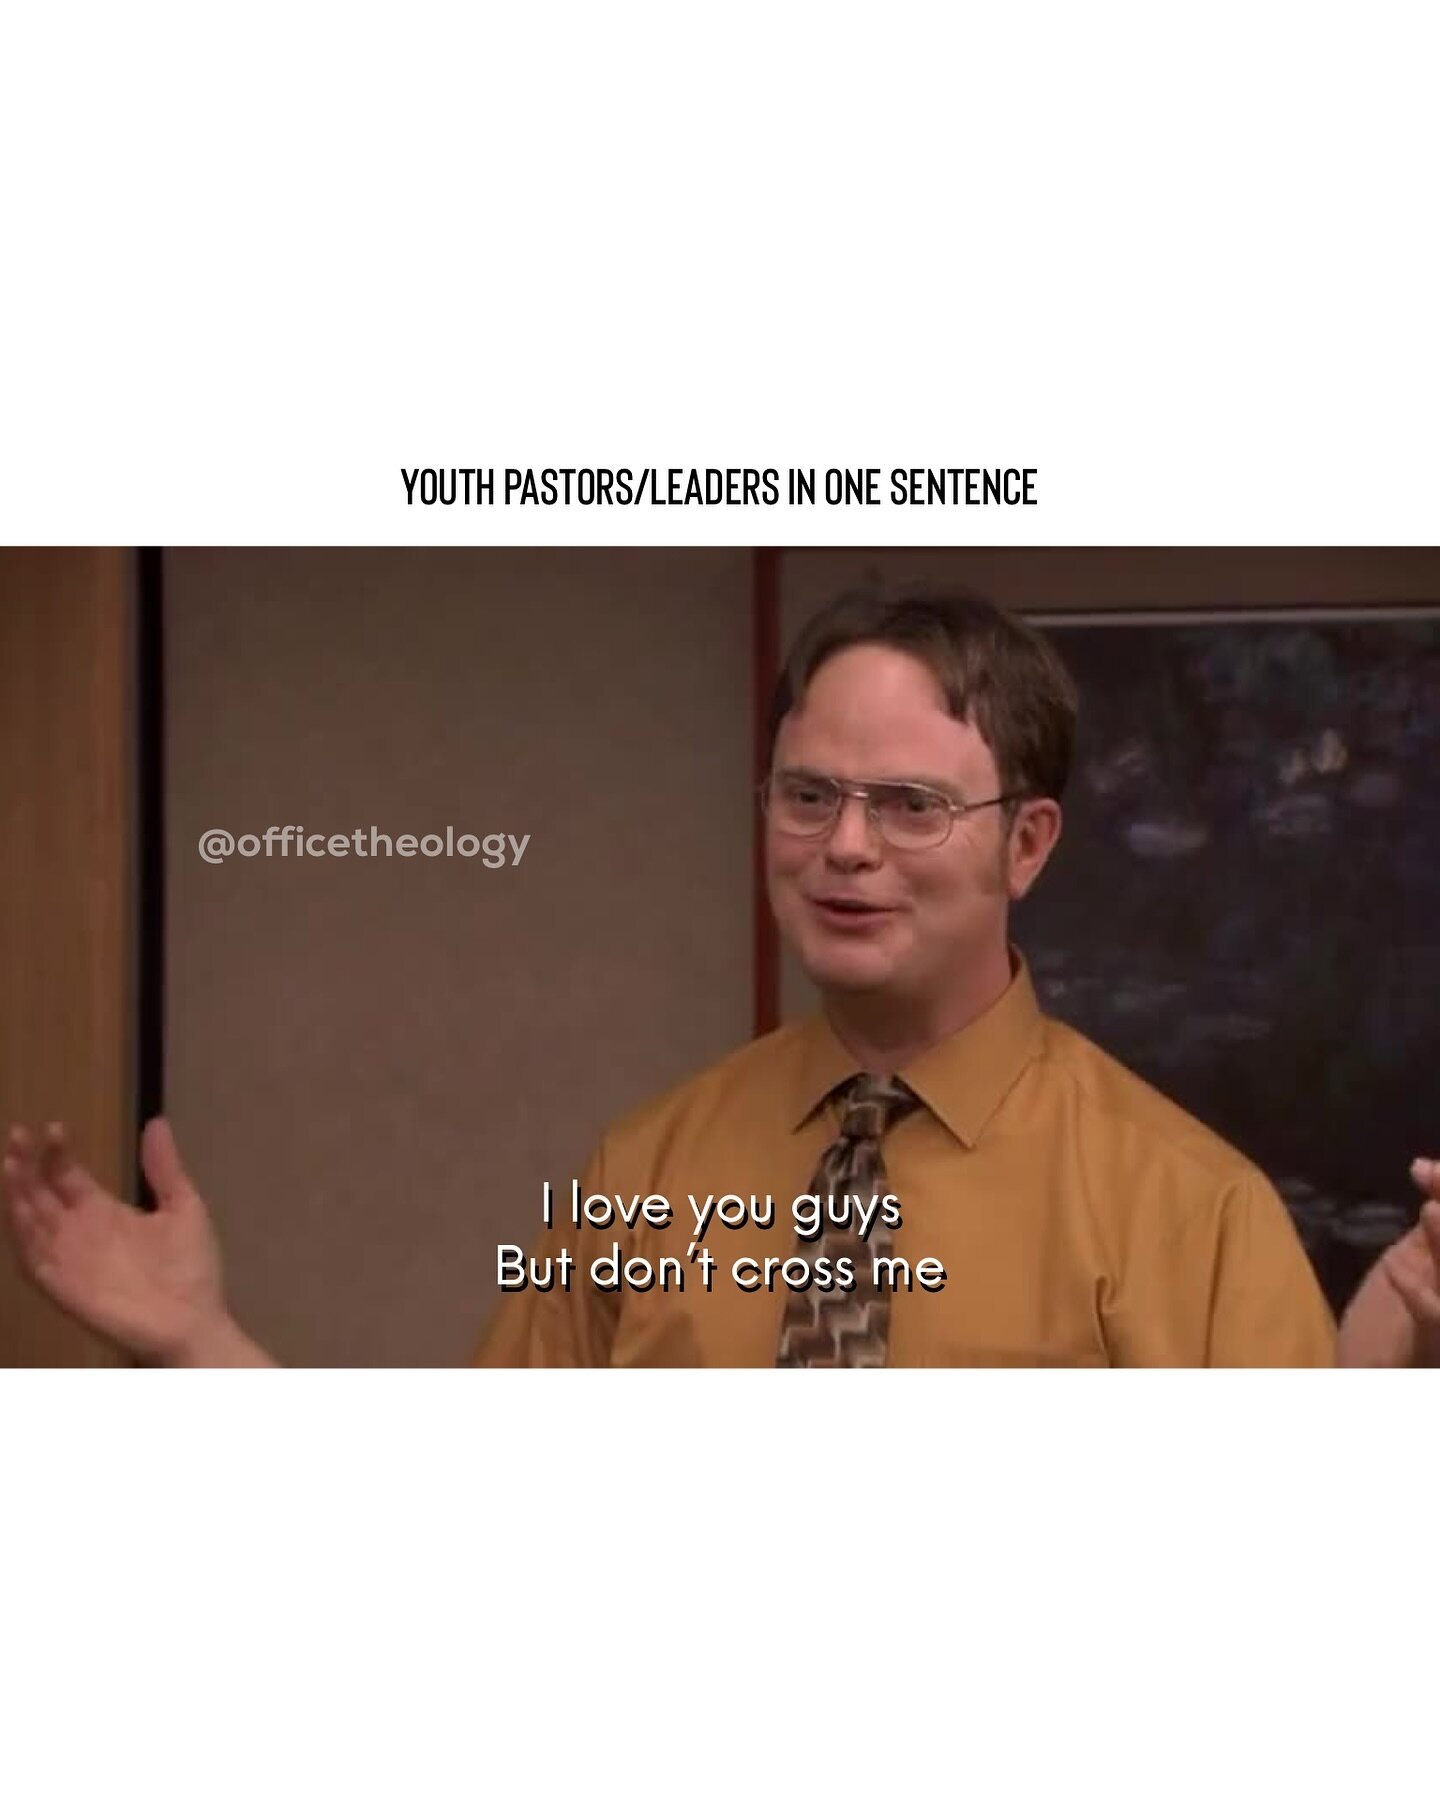 You&rsquo;re the best. 
.
Follow @officetheology for daily memes. 
. 
.
.
.
.
.
.
.

#explore #office #theoffice #theofficememes #theos #bible #christianitv #christian #christianmemes #christianmeme #funny #explorepage #nbc #theology #theologymatters